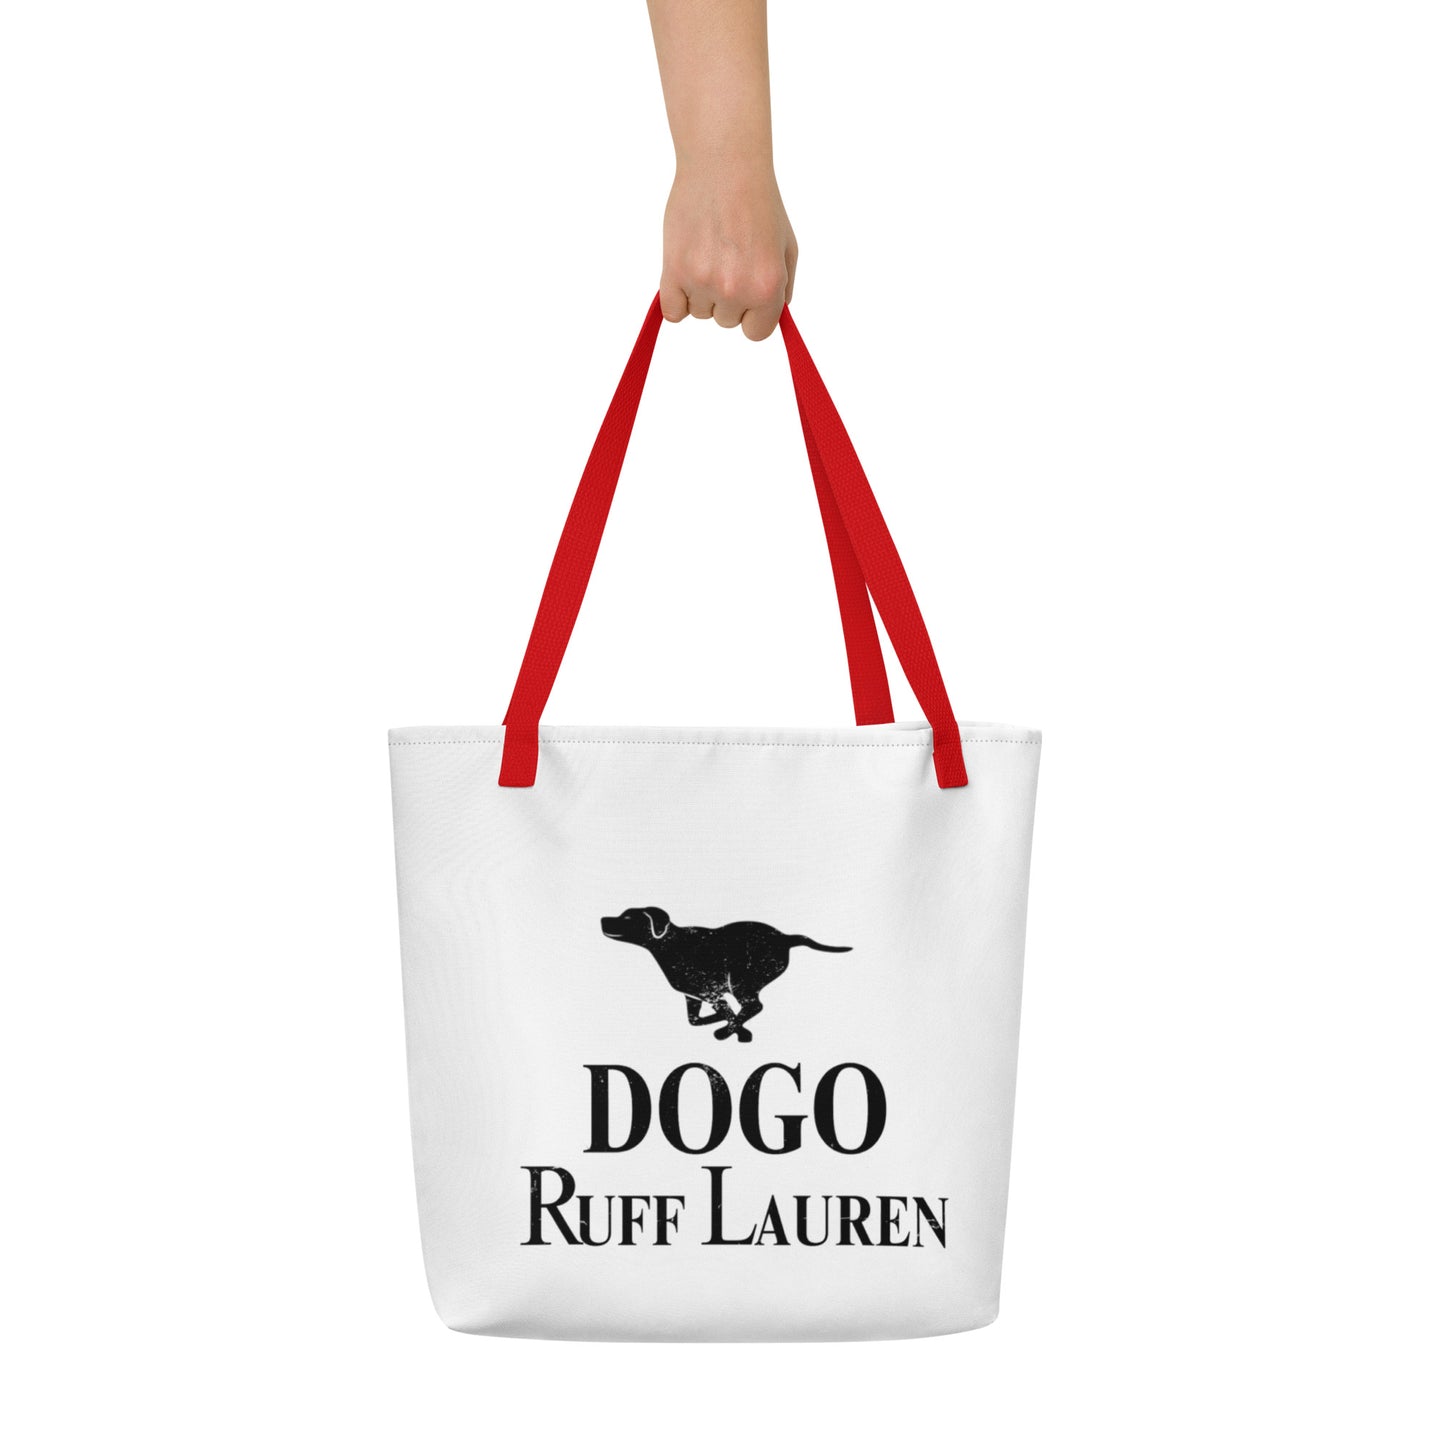 Dogo Ruff Lauren All-Over Print Large Tote Bag